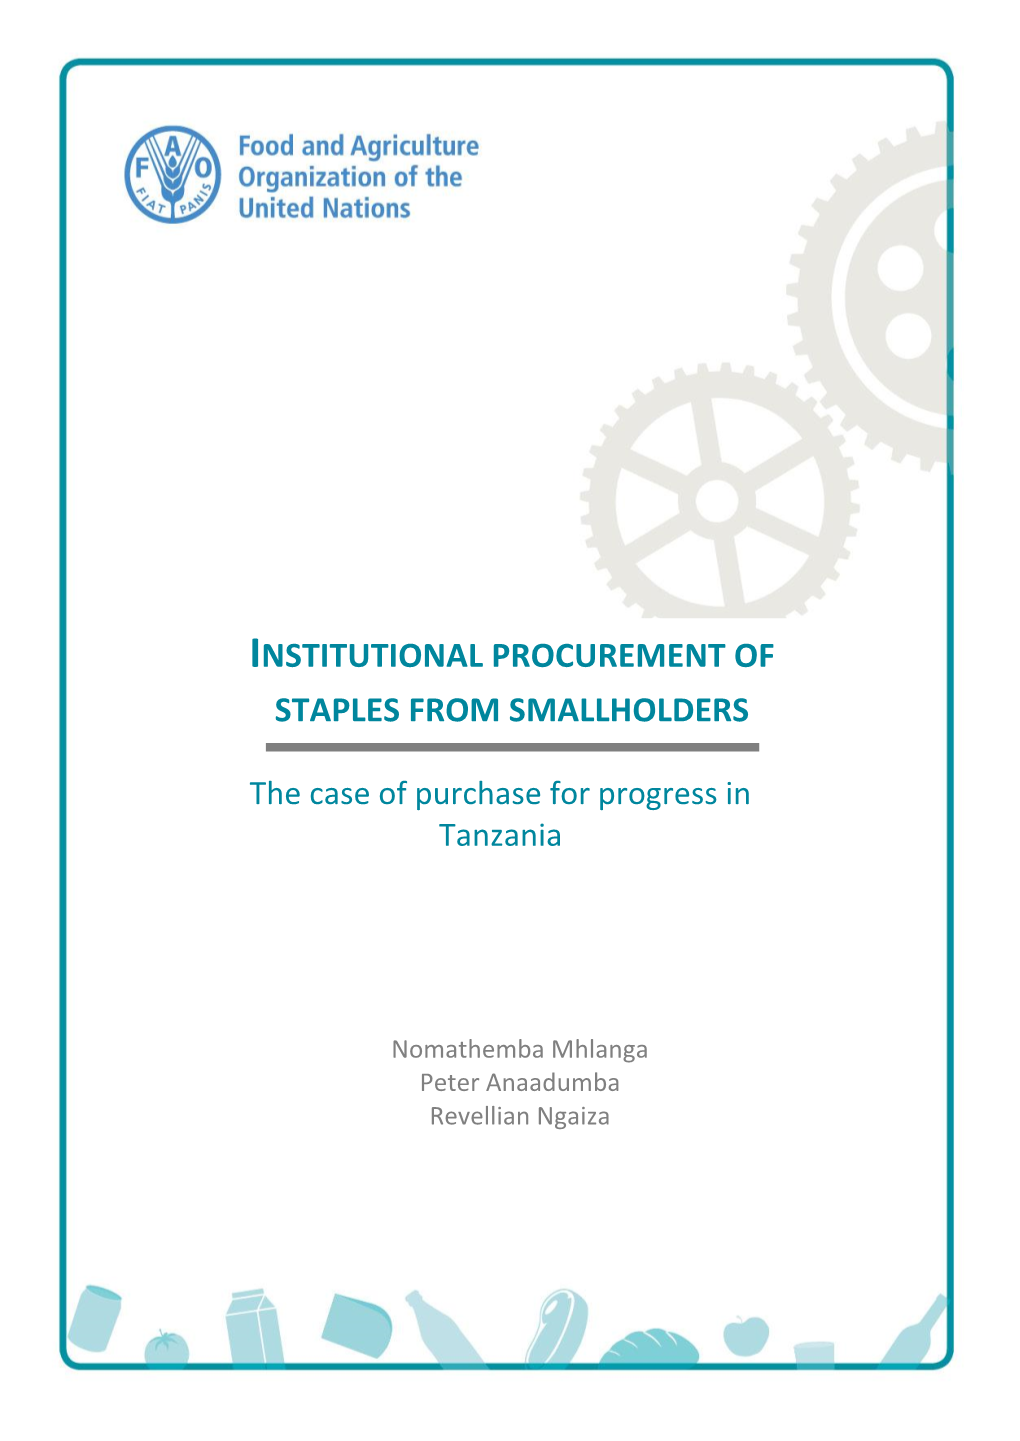 Institutional Procurement of Staples from Smallholders